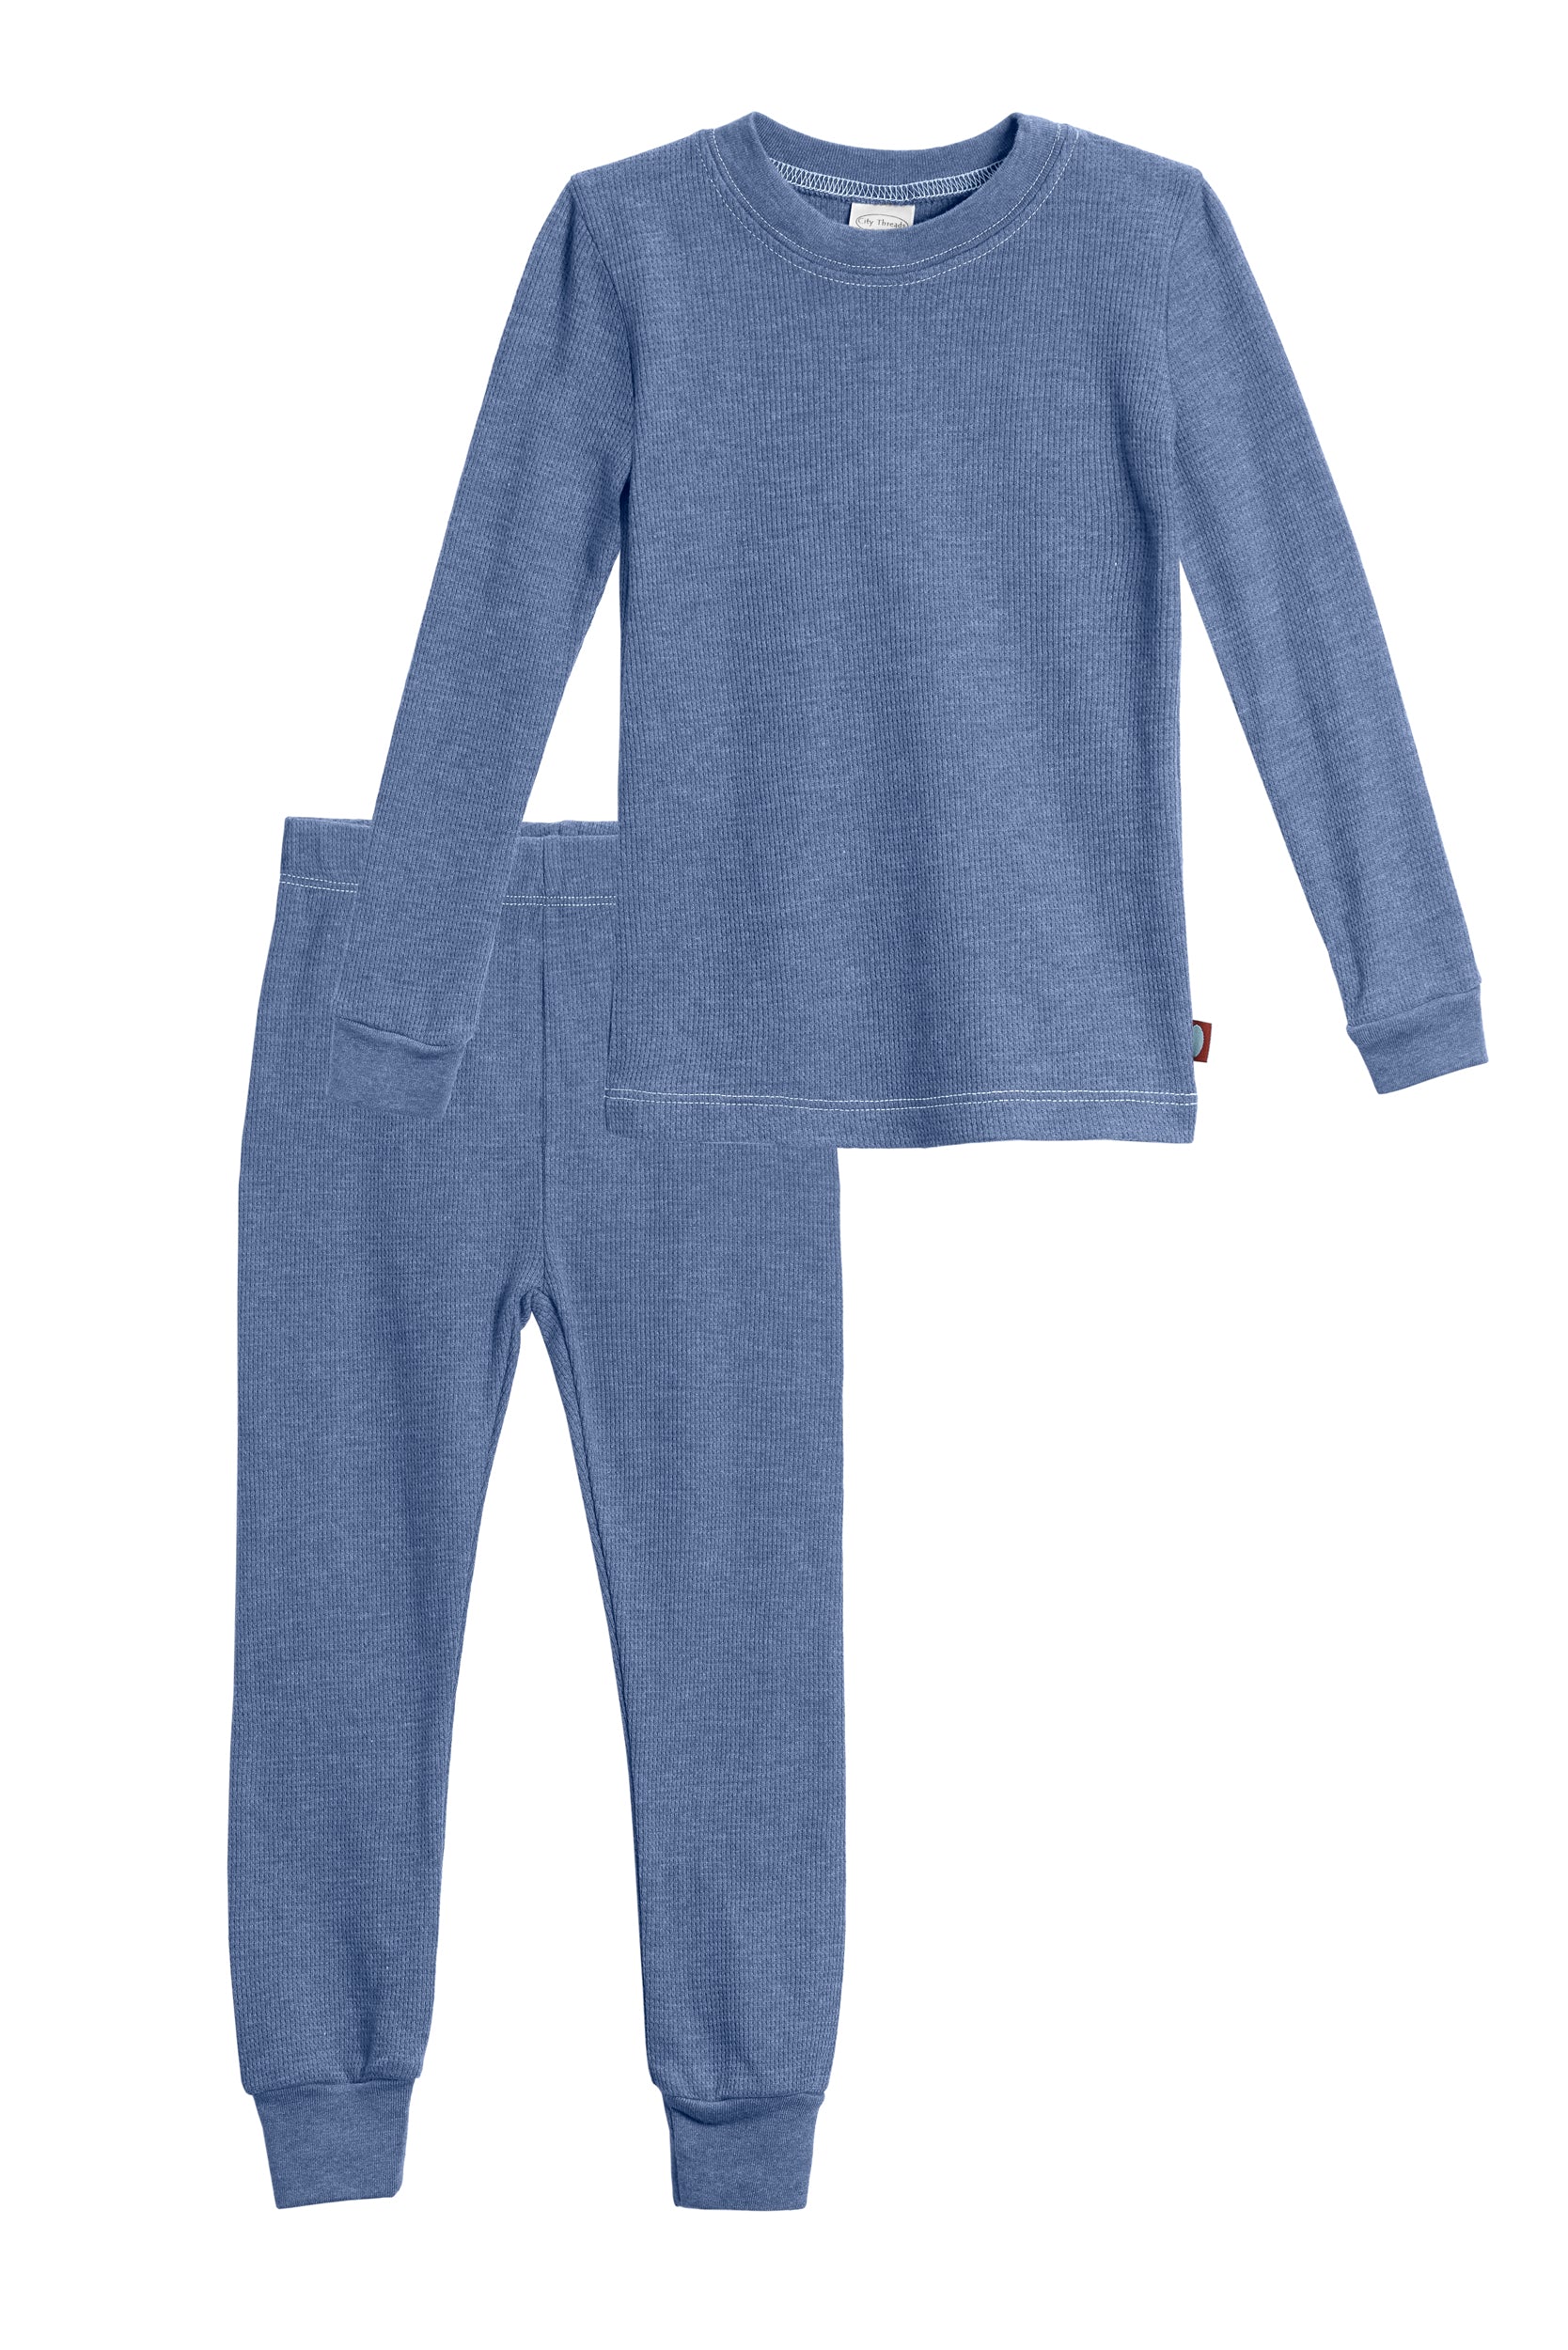 NOOYME Thermal Underwear for Kids Long Underwear Kids Long Johns Set for  Boys Girls, Blue, XL / Height 59-61 in : Buy Online at Best Price in KSA -  Souq is now : Fashion